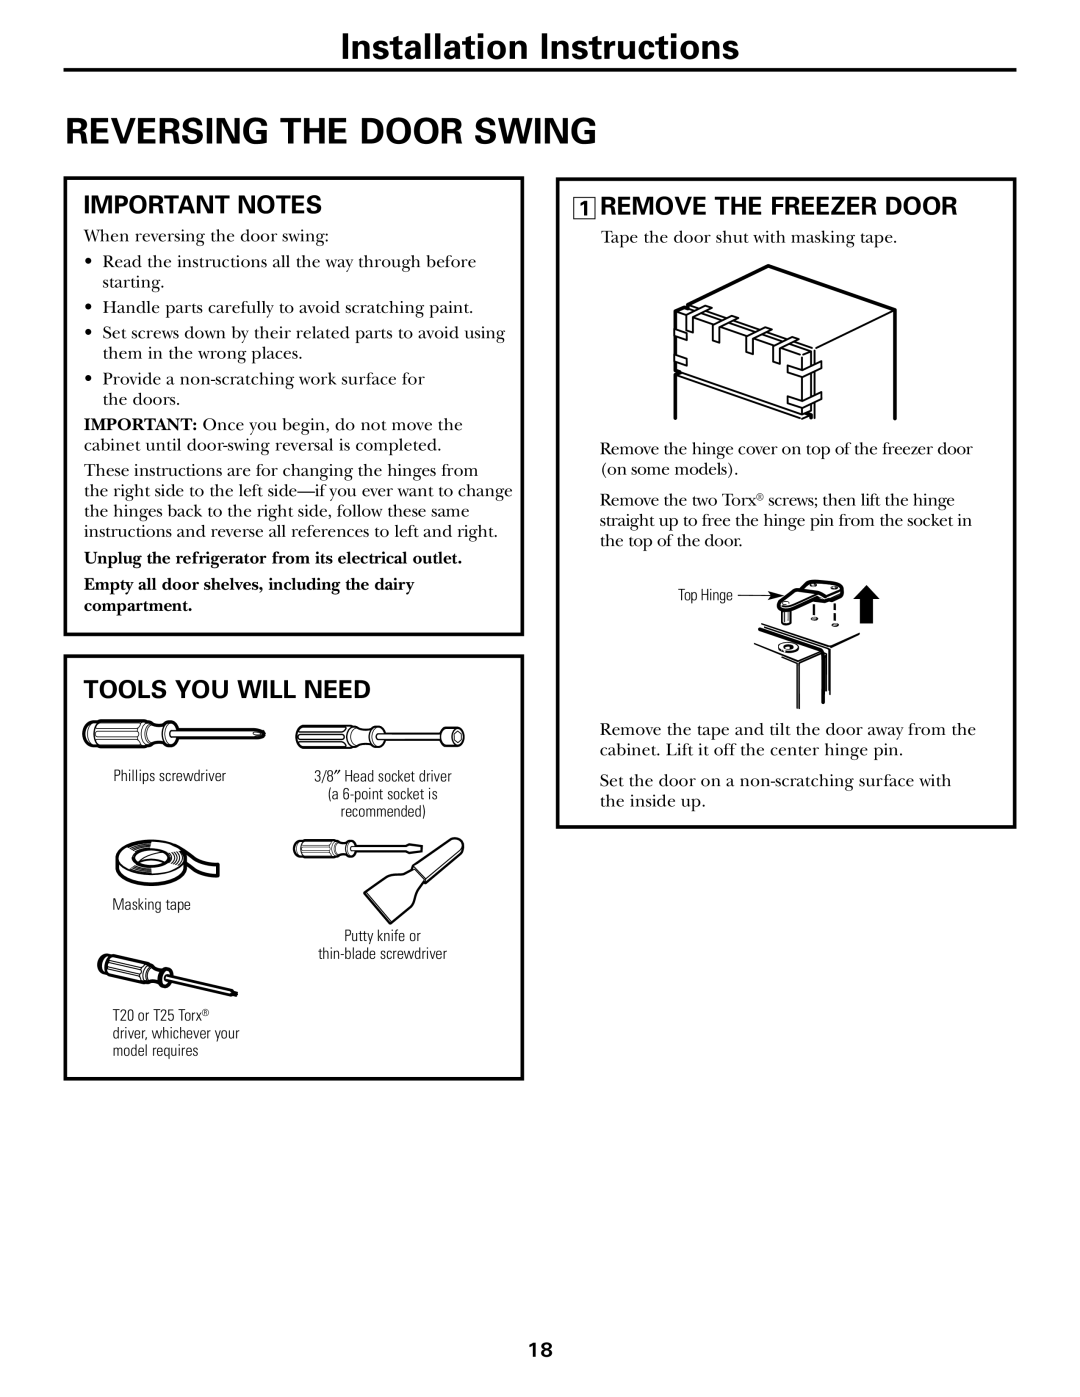 Hotpoint 19 Installation Instructions REVERSING THE DOOR SWING, Important Notes, Tools You Will Need 